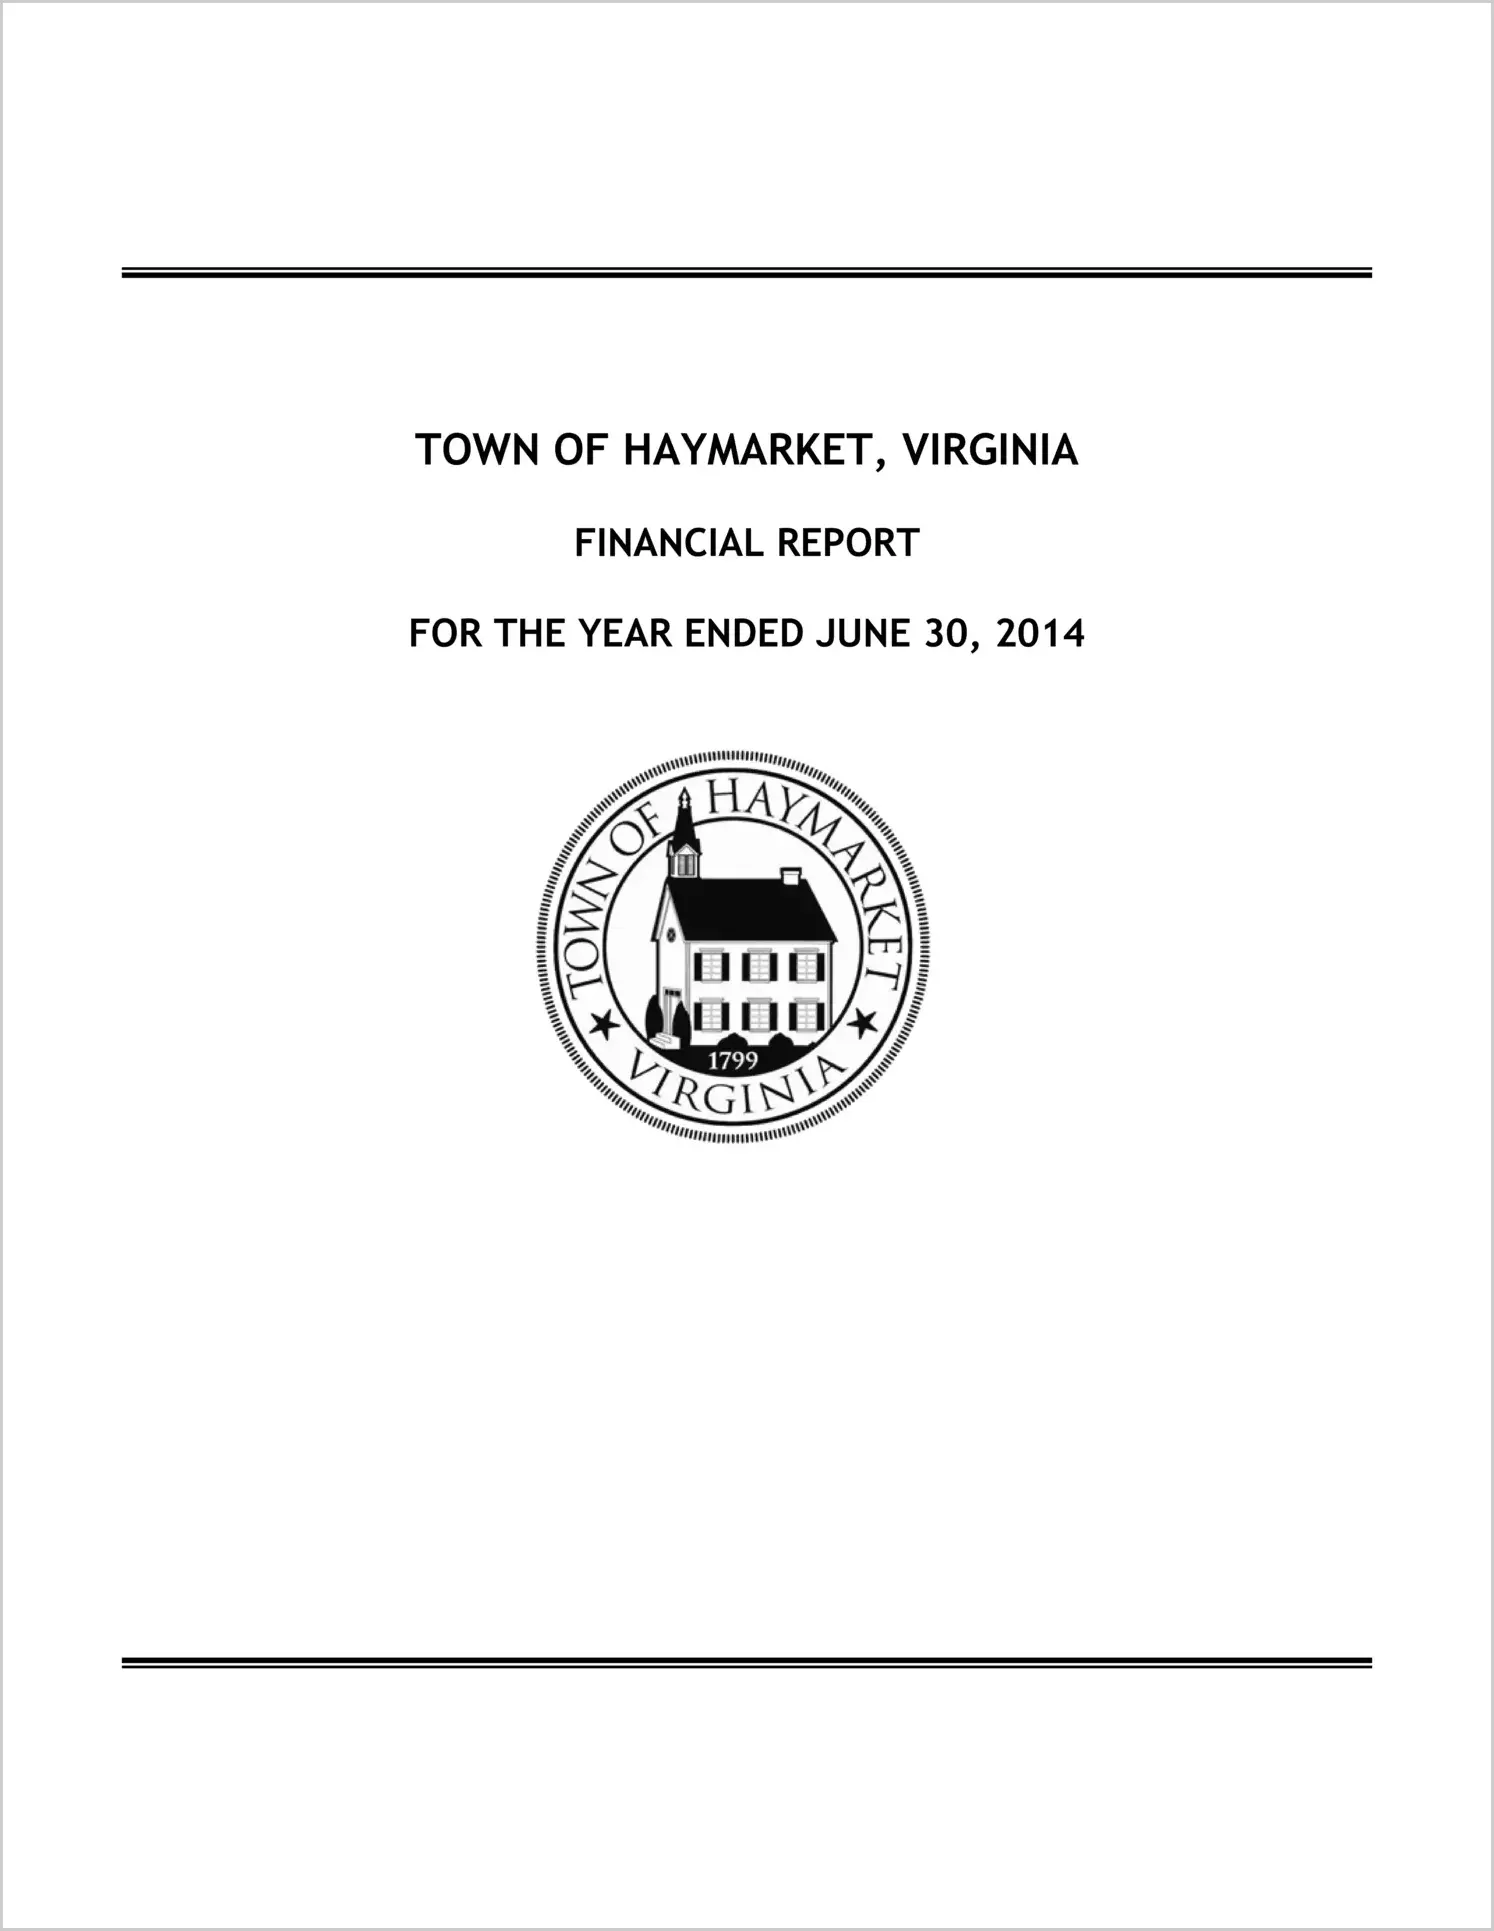 2014 Annual Financial Report for Town of Haymarket